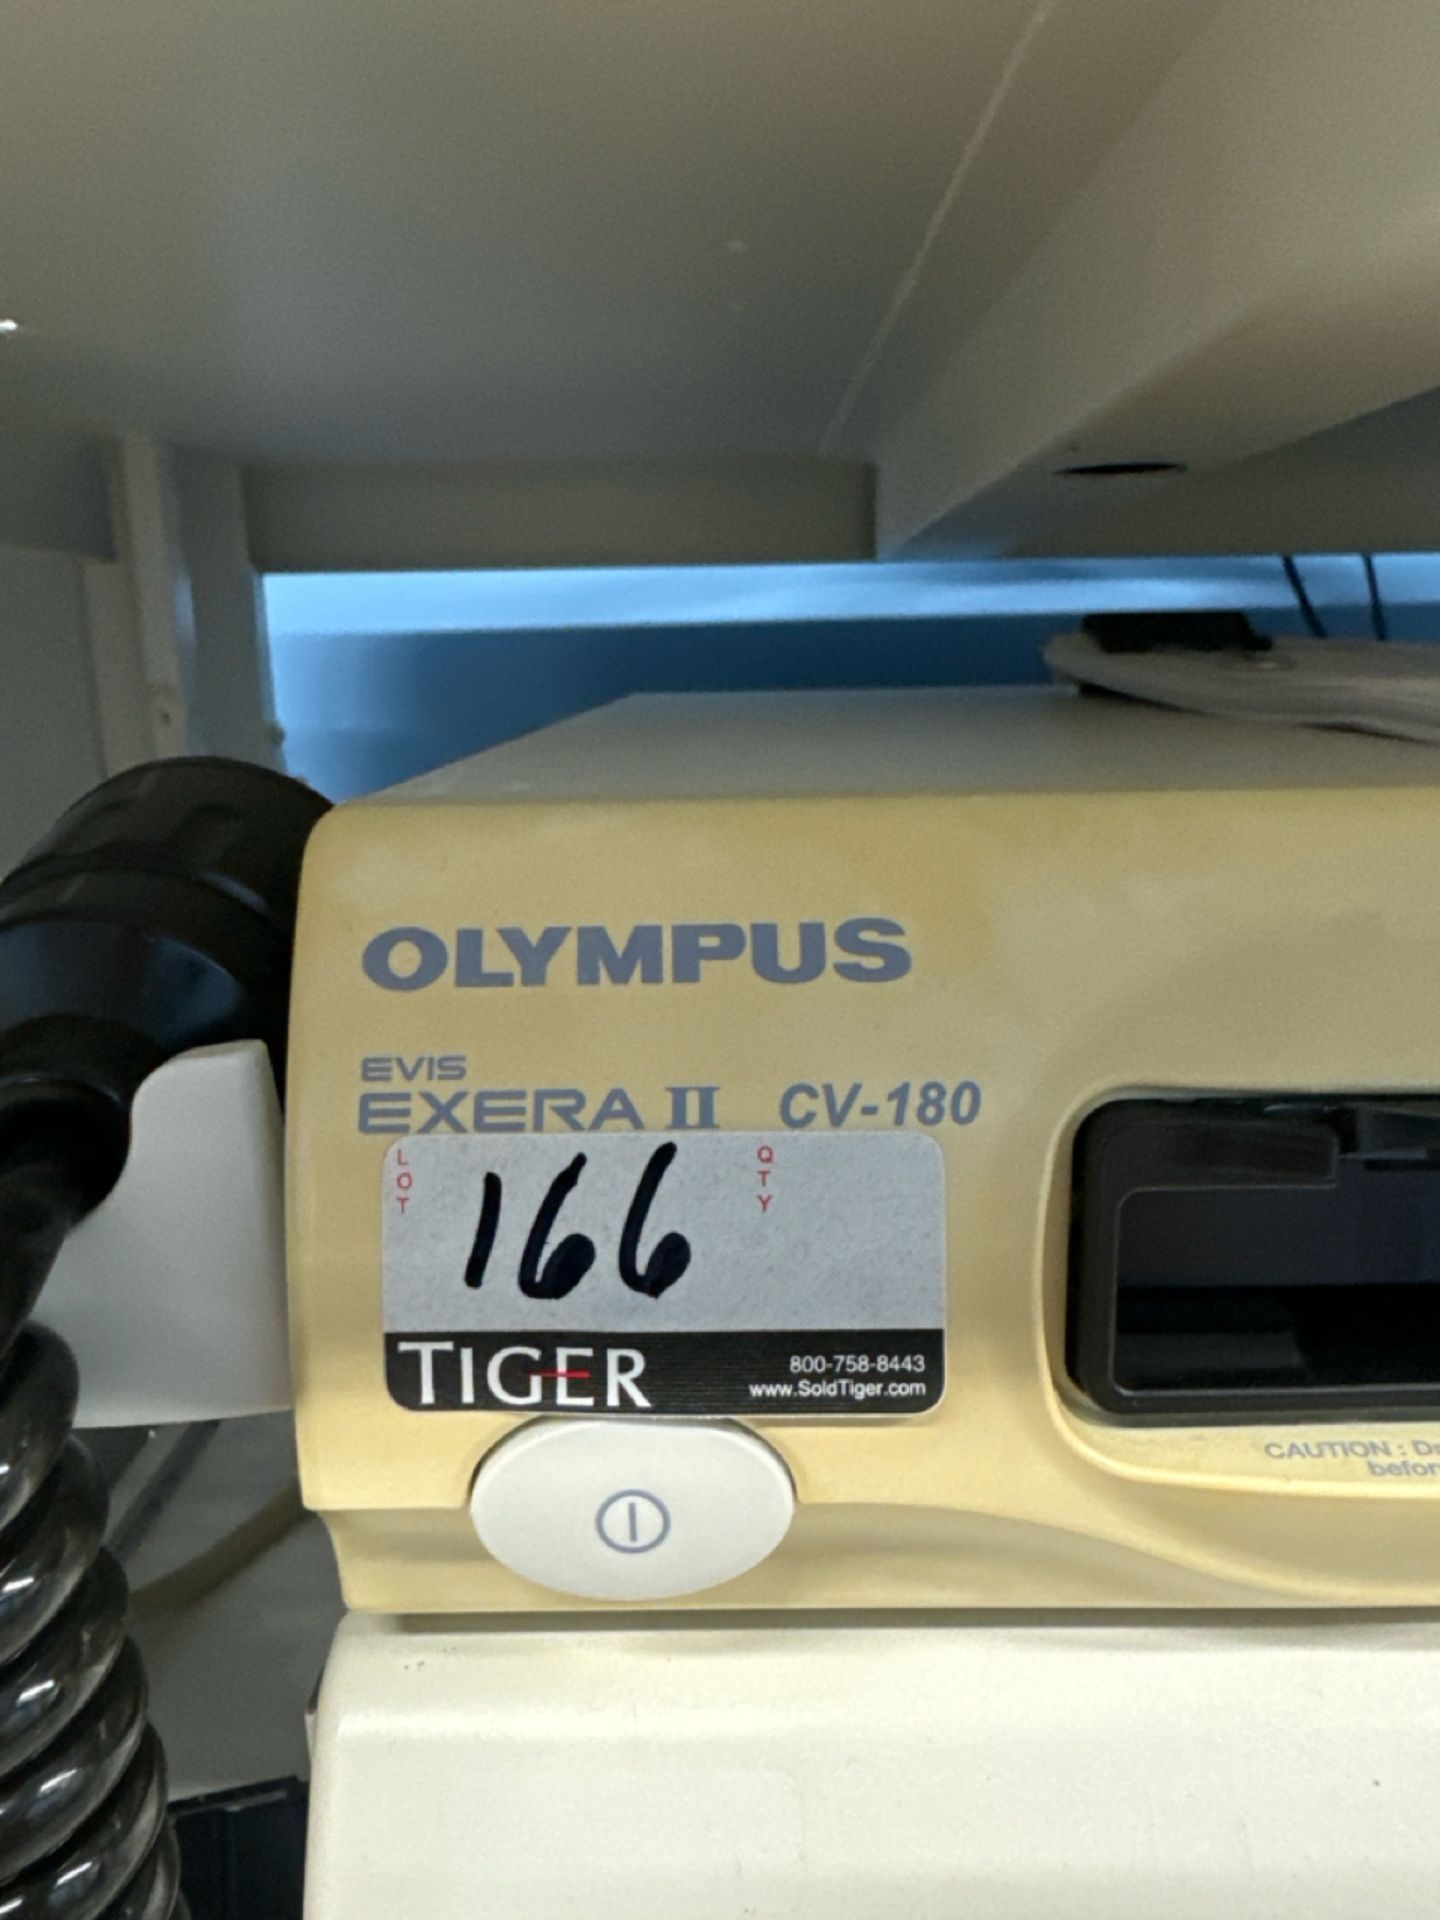 Olympus Evis Exera II Imager - Image 2 of 3